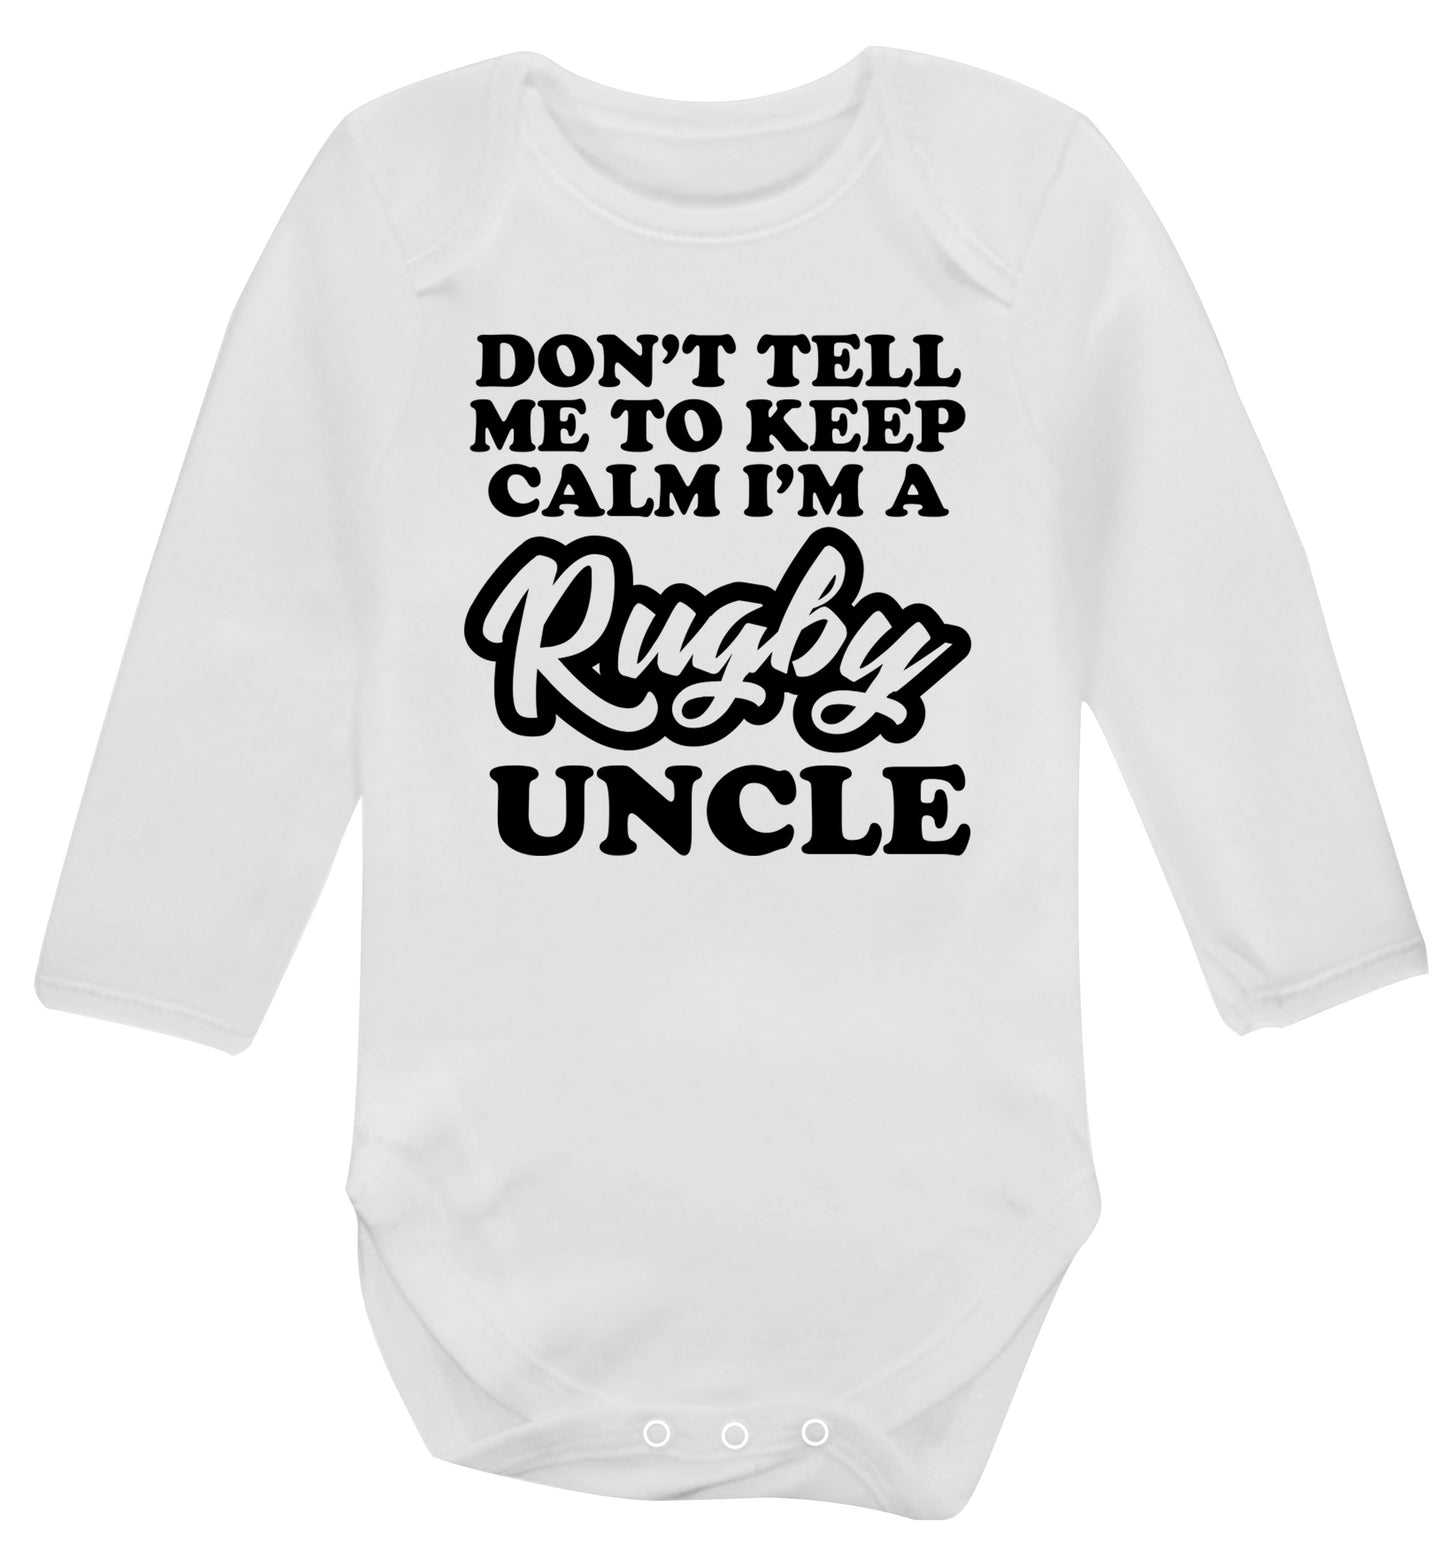 Don't tell me to keep calm I'm a rugby uncle Baby Vest long sleeved white 6-12 months